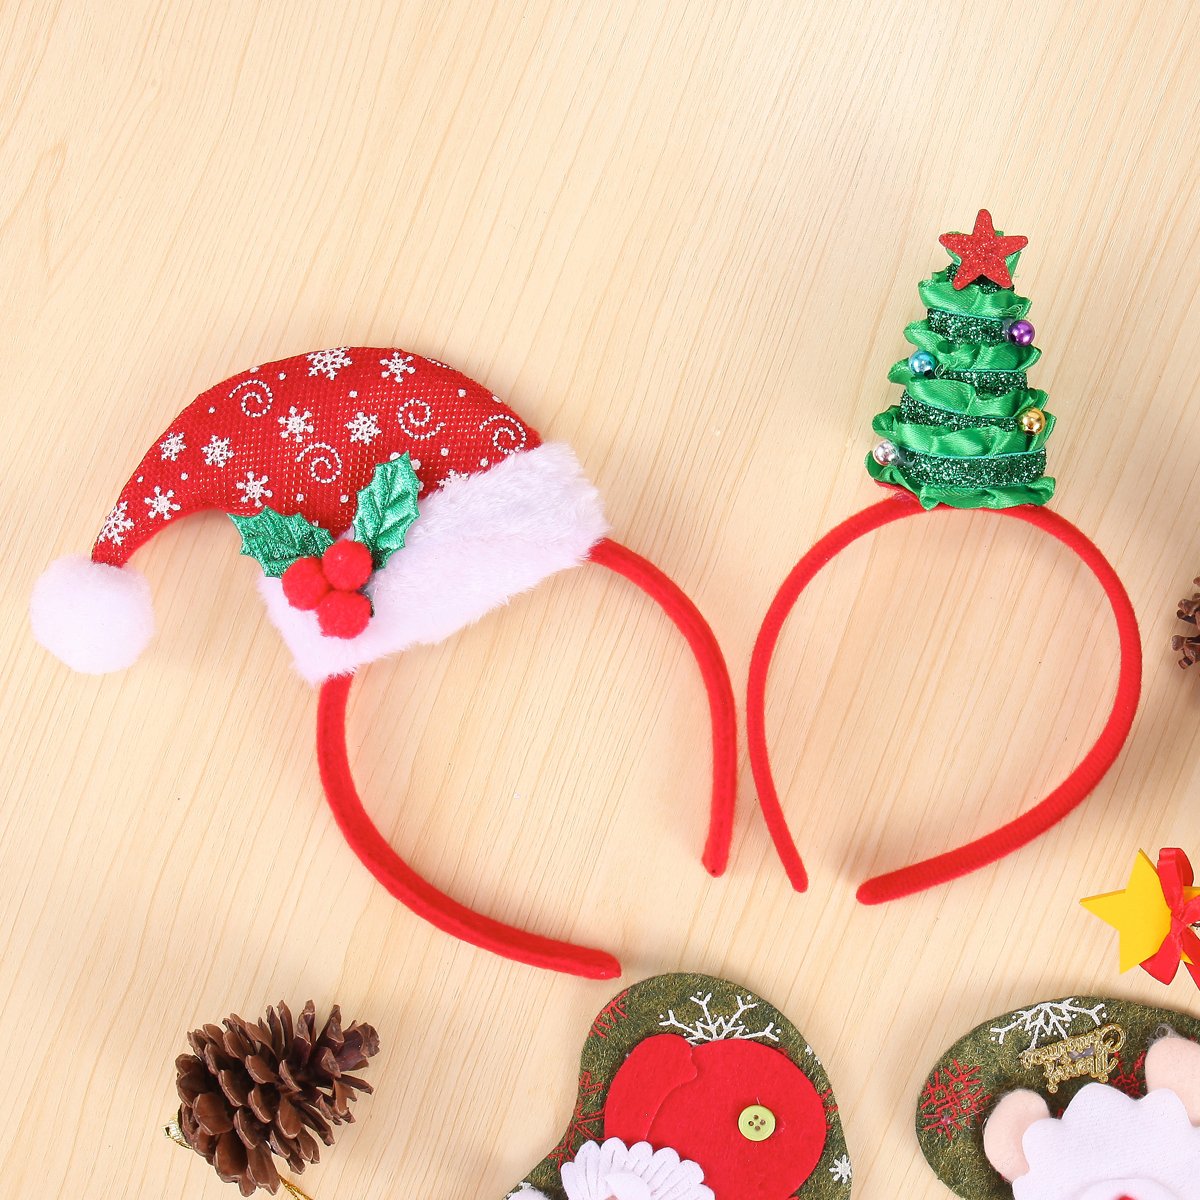 Pack of 8 Christmas Headbands with Different Designs for Christmas and Holiday Parties (ONE Size FIT ALLL) Red